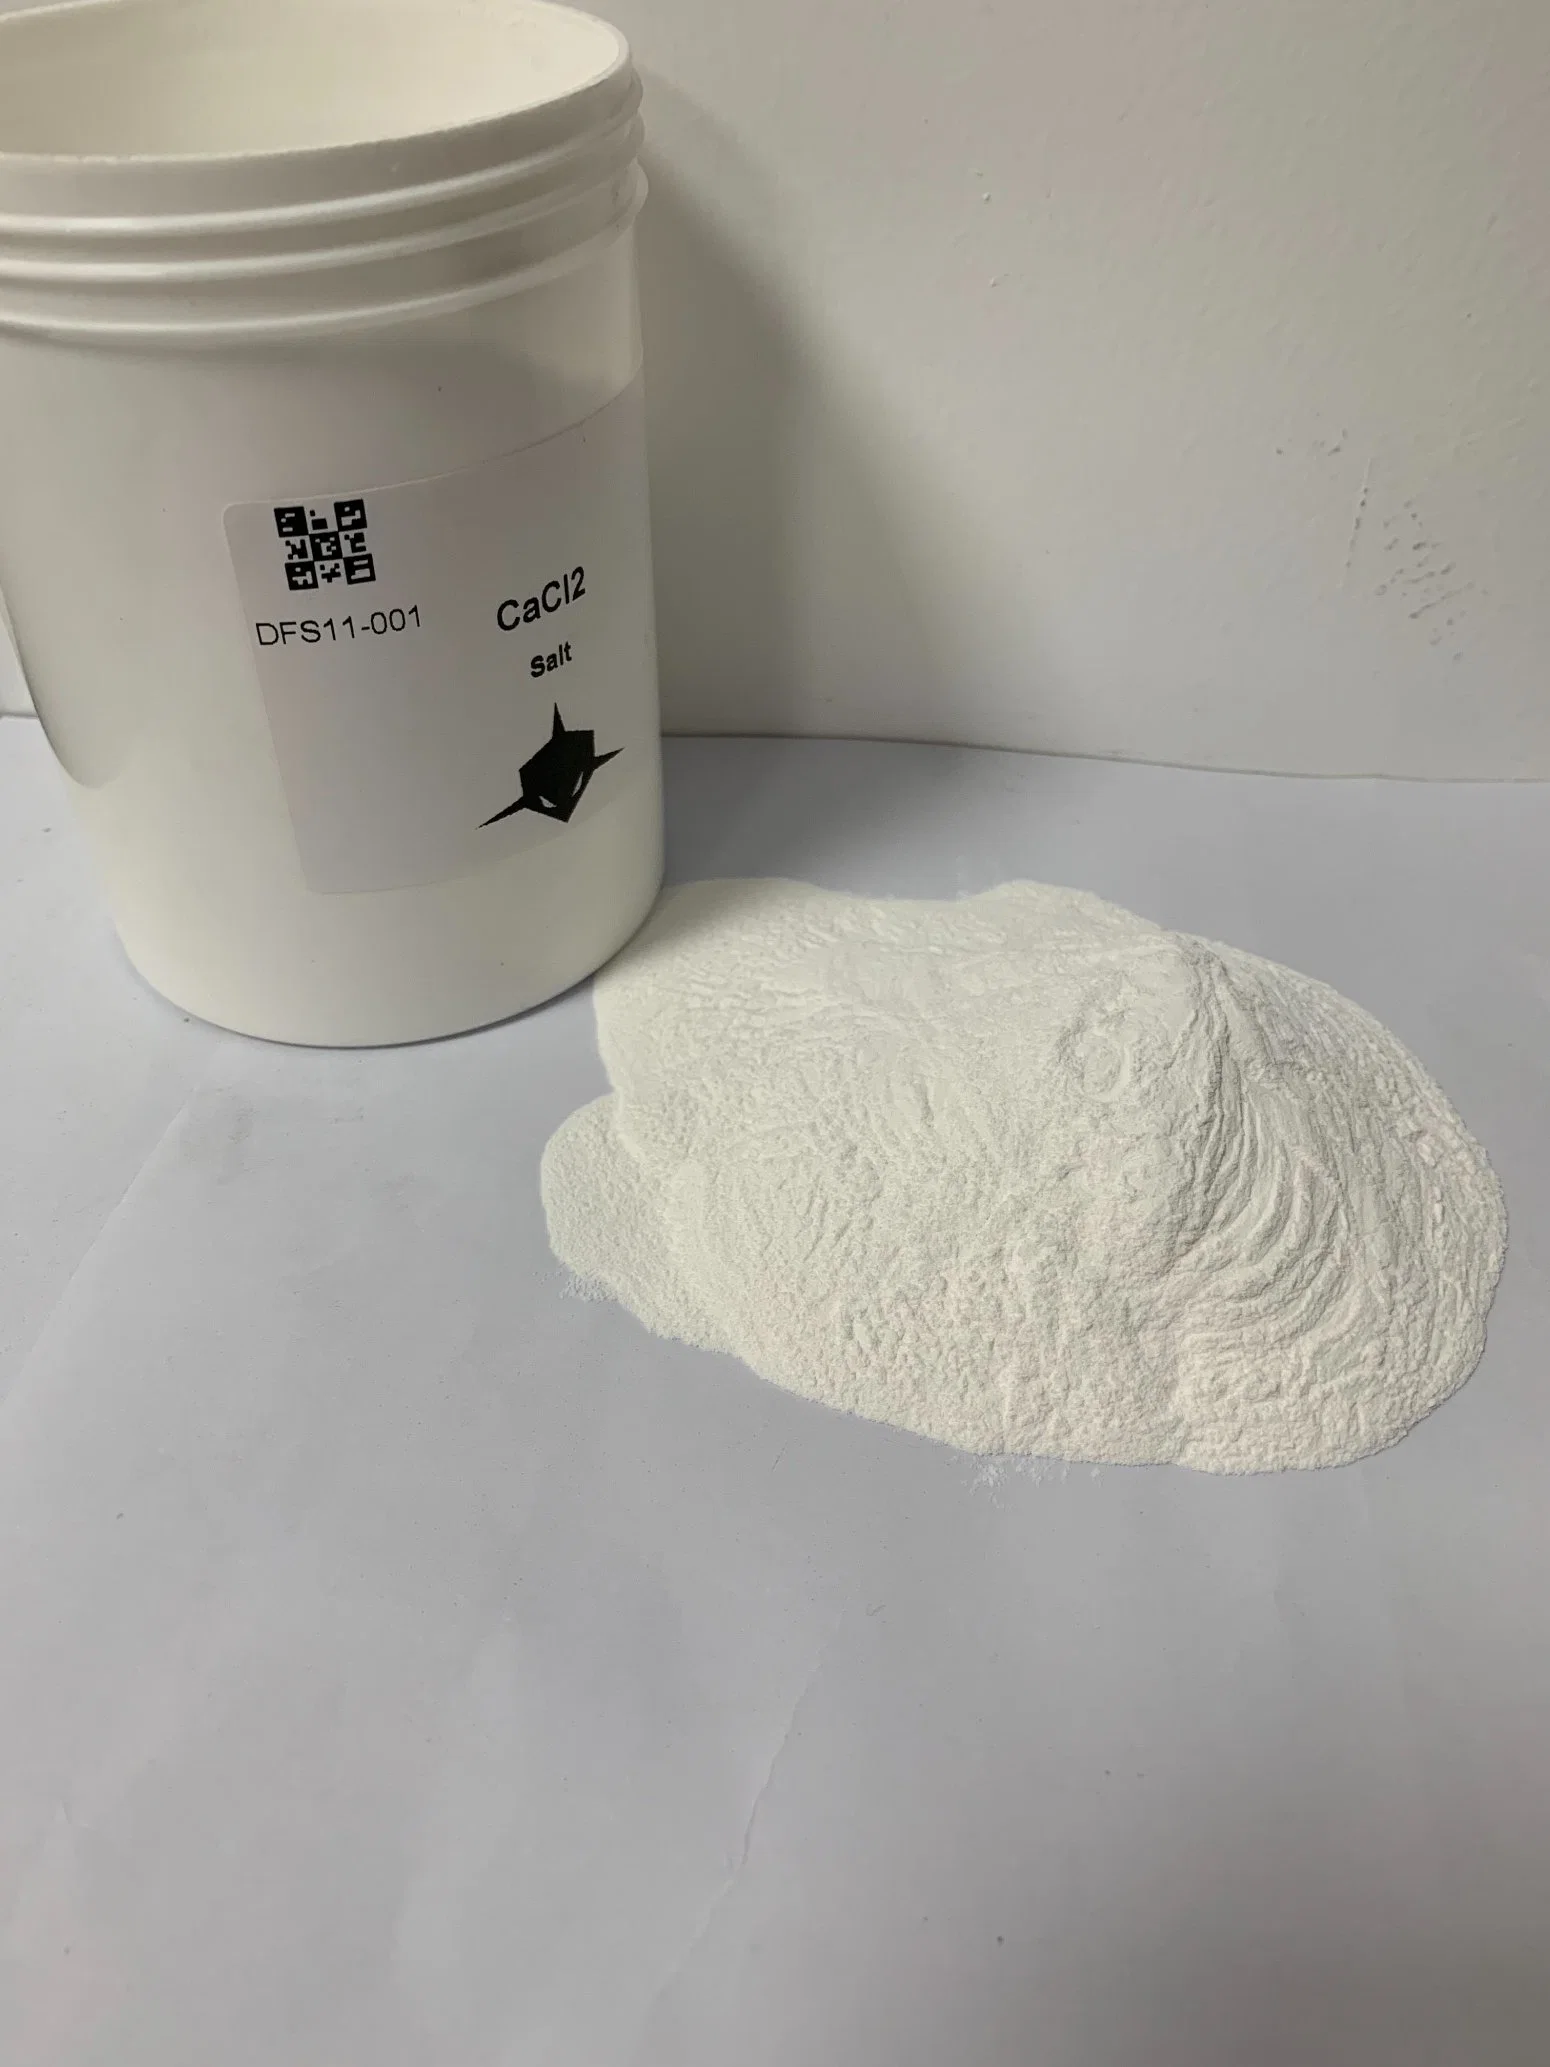 Drilling and Completion Fluid Additive--Inorganic Salt